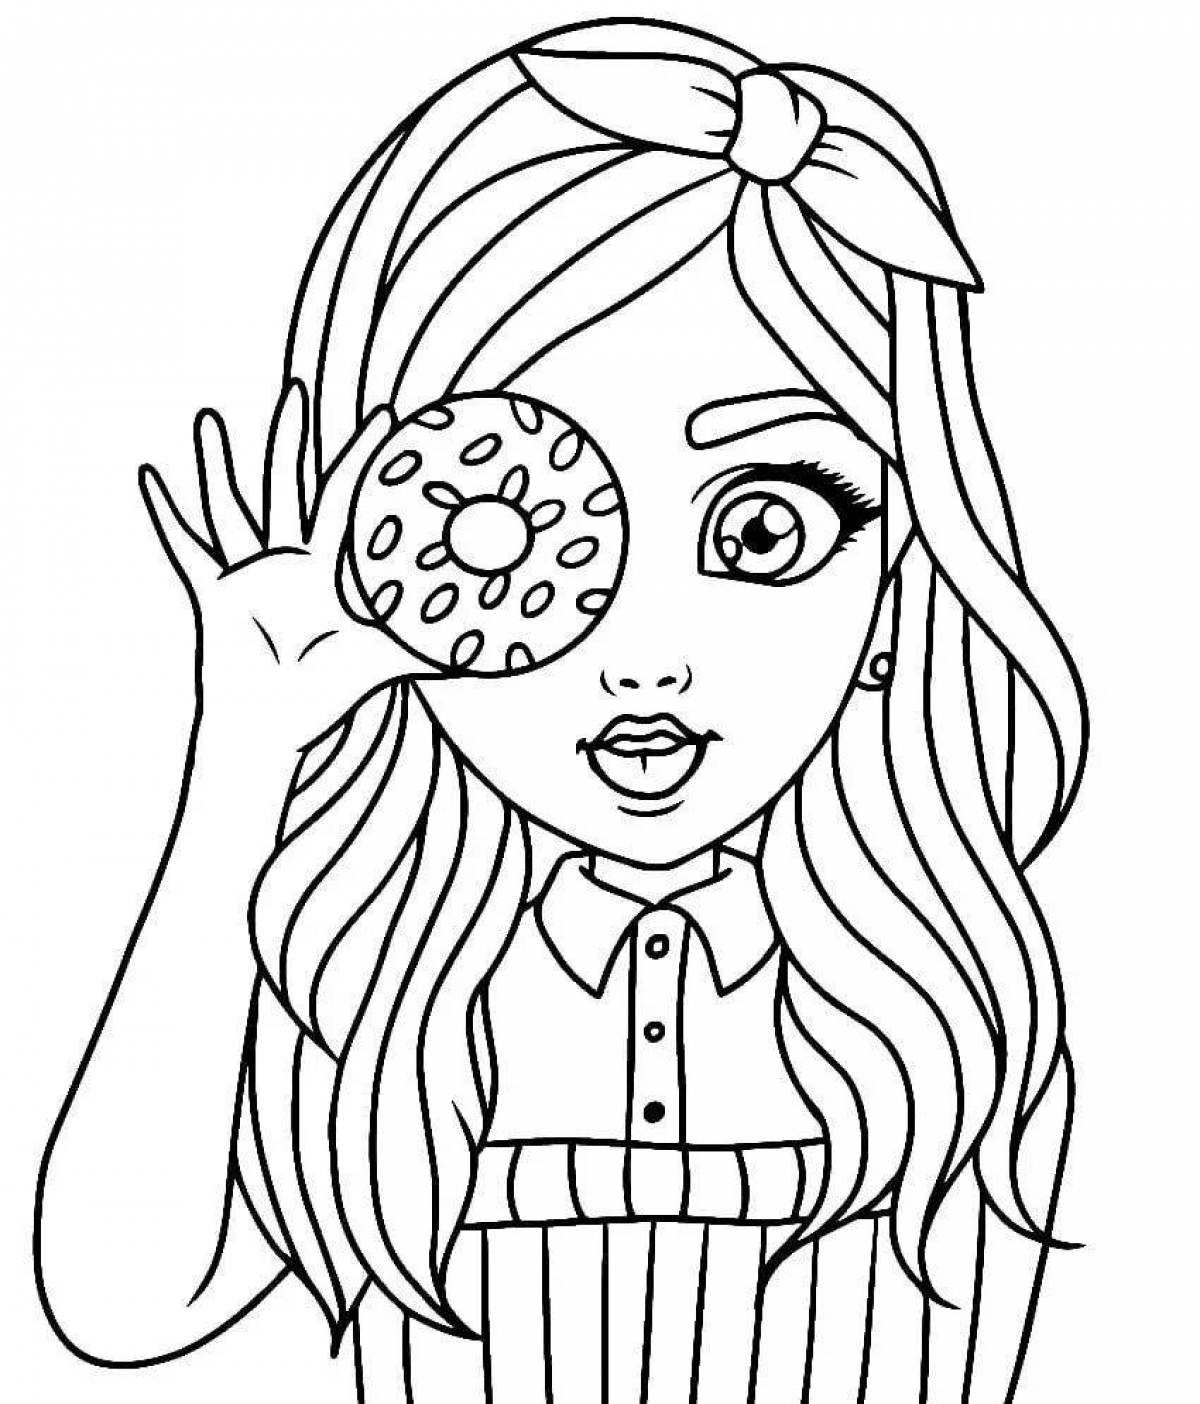 Incredible coloring book for 12 year old girls easy